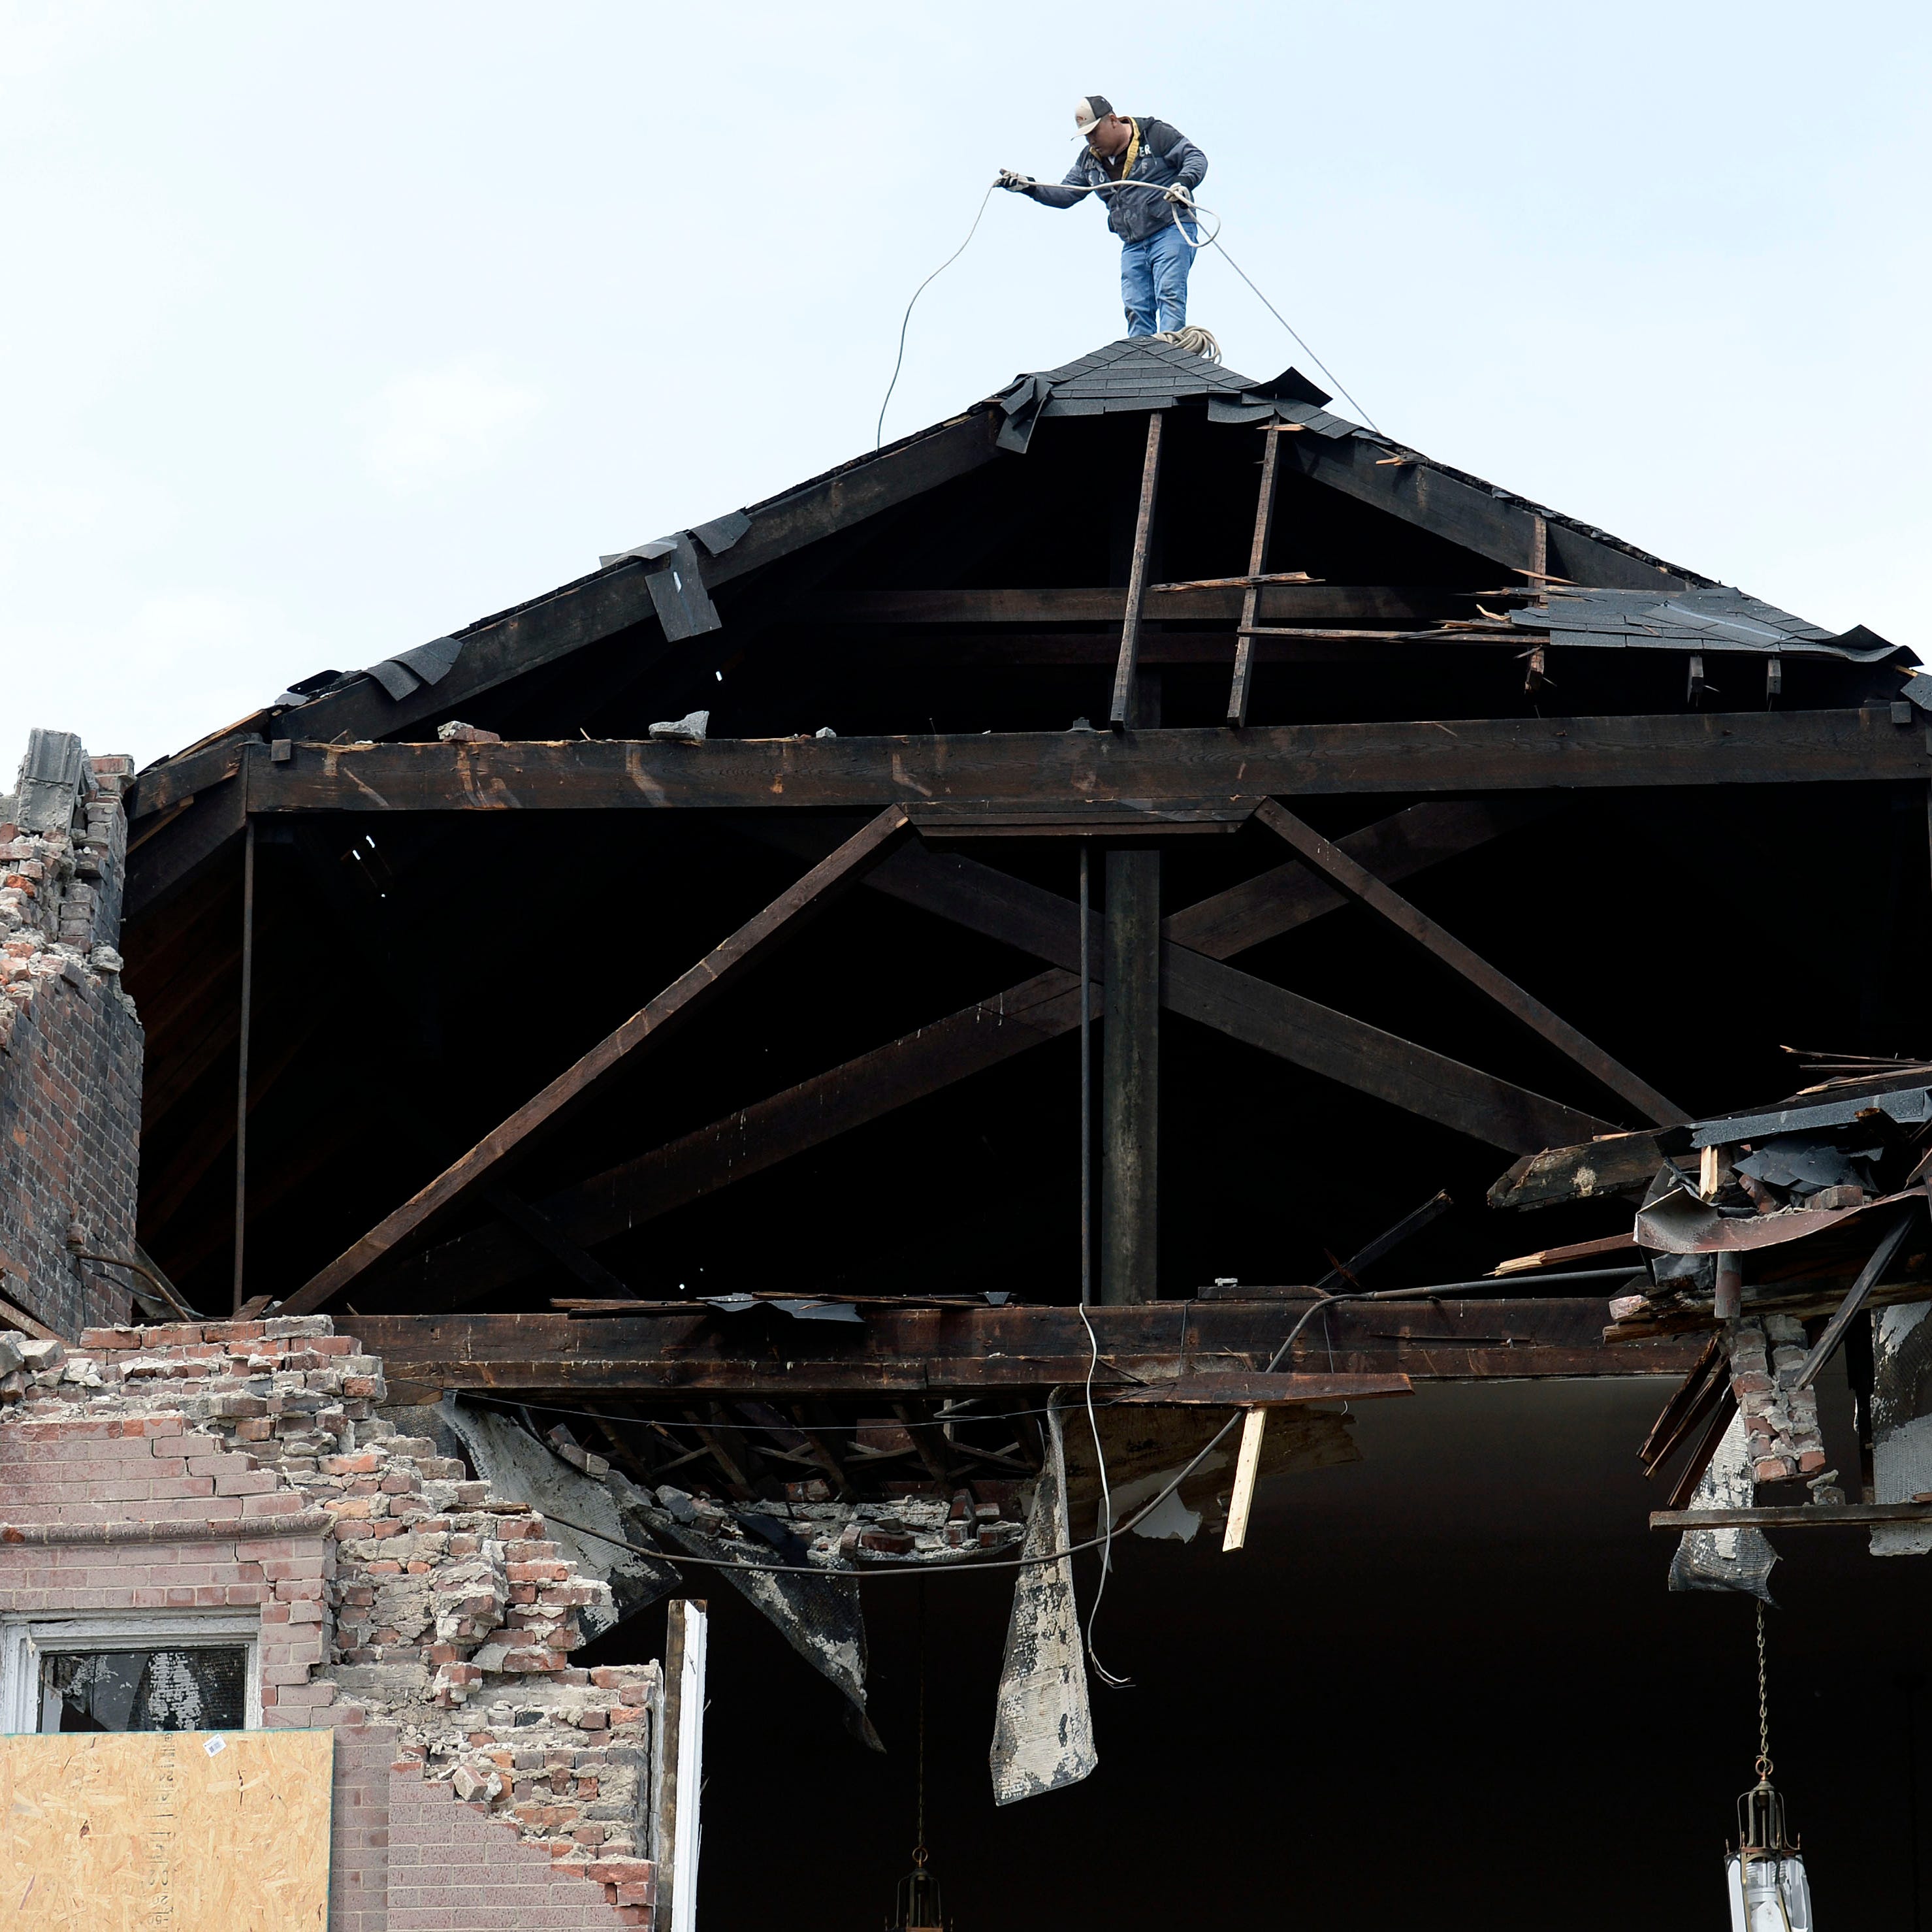 Artemio Salgado puts rope across the top of the tornado damage Hopewell Baptist Church before covering the opening with a tarp on Wednesday, March 4, 2020, in North Nashville, Tenn. 